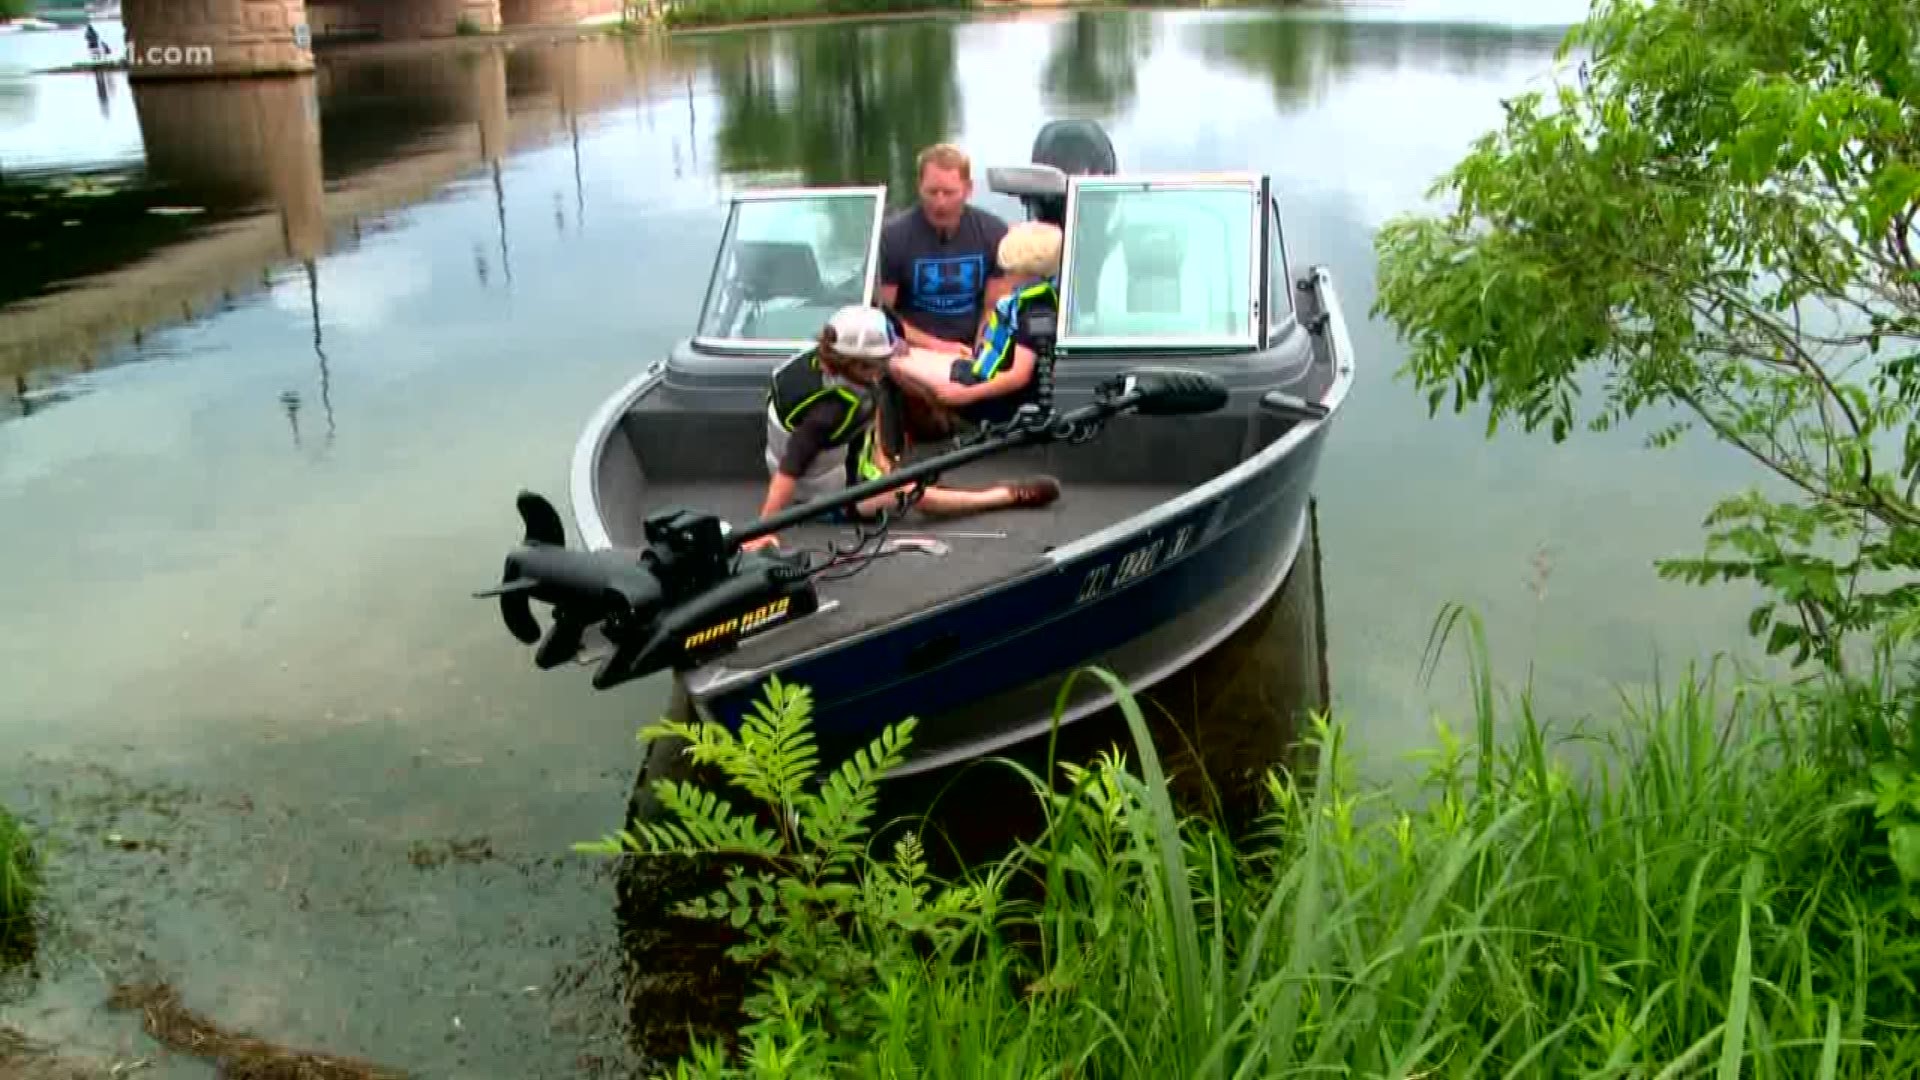 Minnesota's DNR is conducting a education campaign on aquatic invasive species throughout the week.